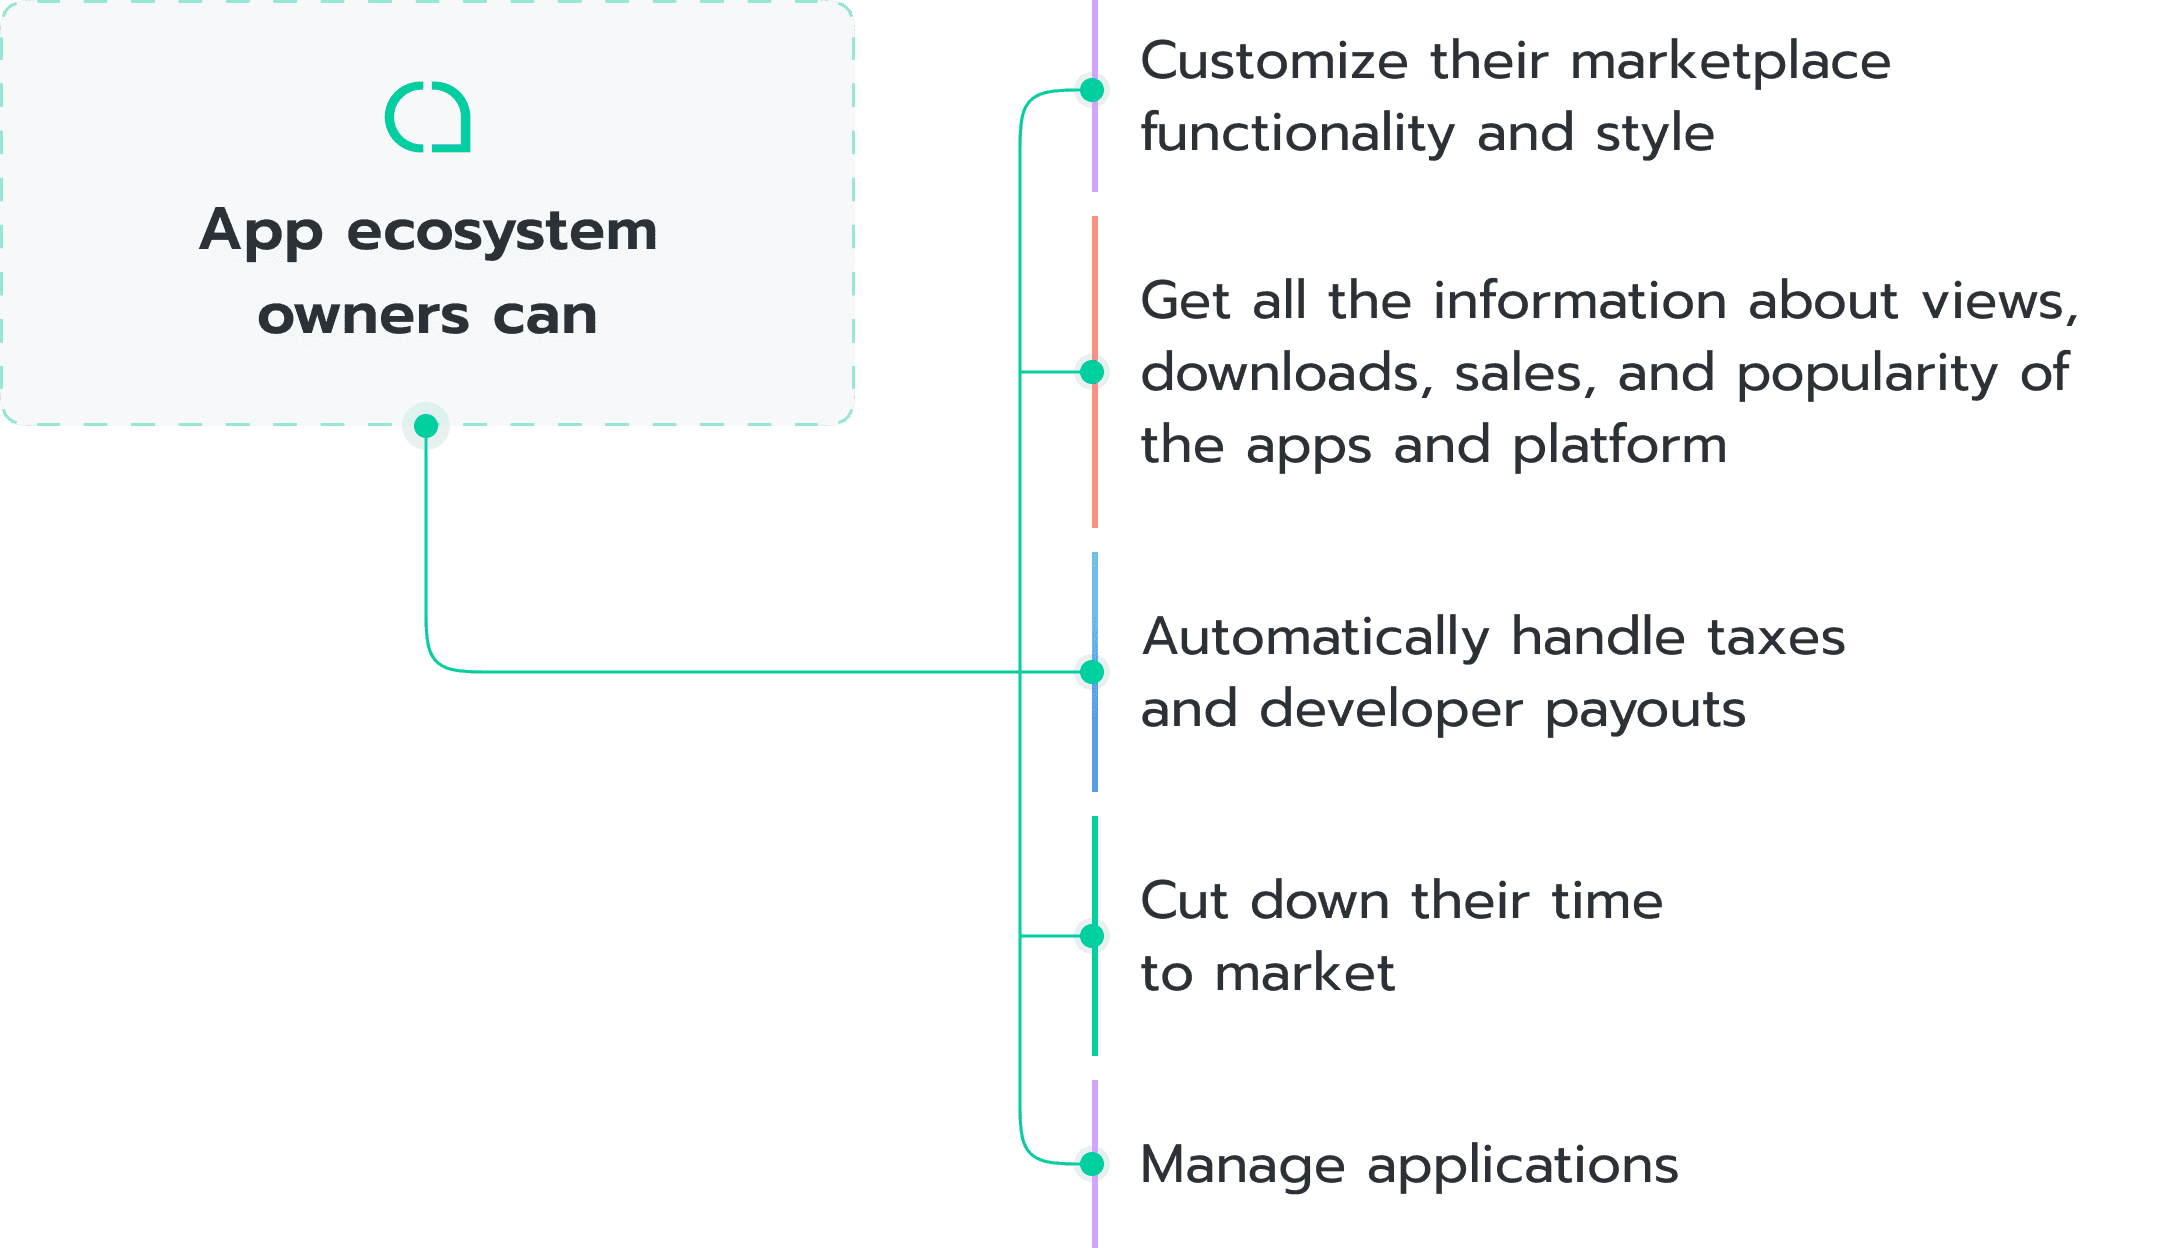 What App ecosystem owners can